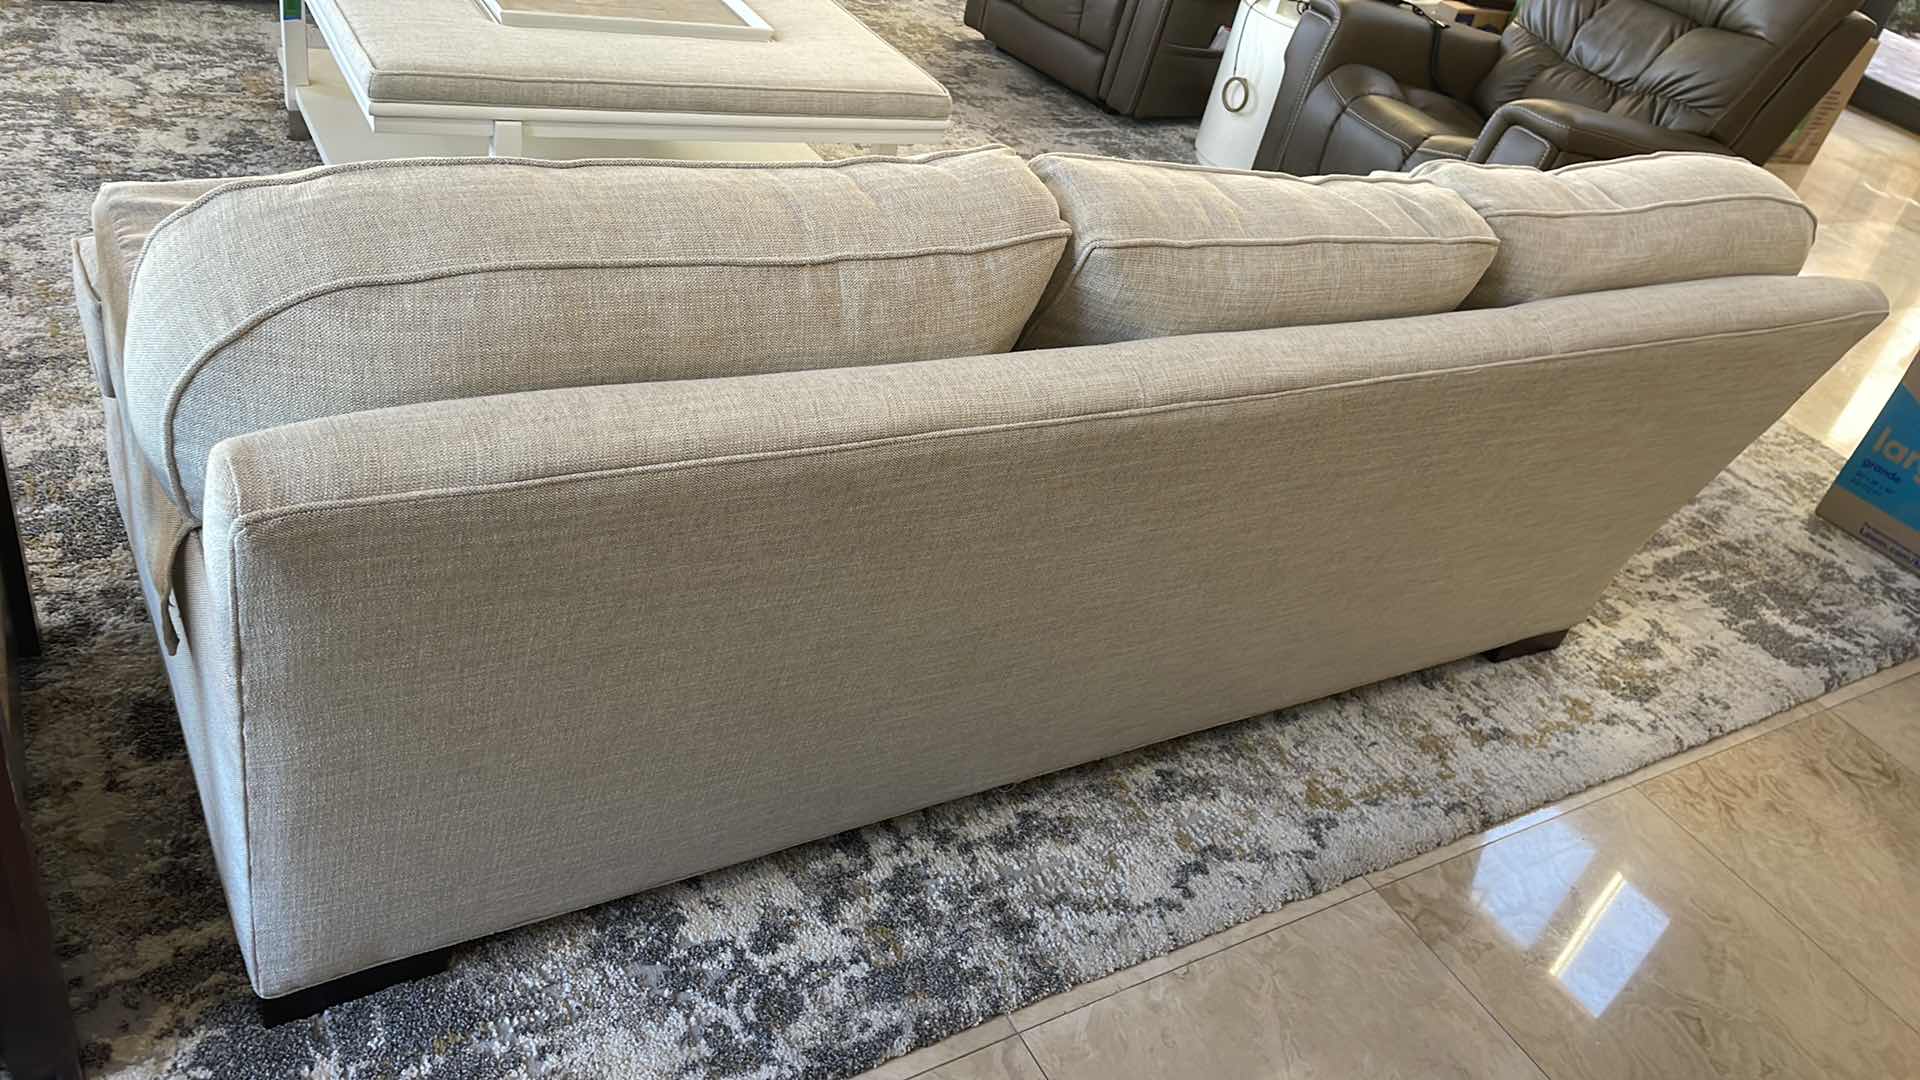 Photo 2 of TAYLOR MADE SOFA BY TAYLOR KING ATTACHED BACK CUSHIONS LAMSON LINEN FINISH FABRIC 87” X 40”